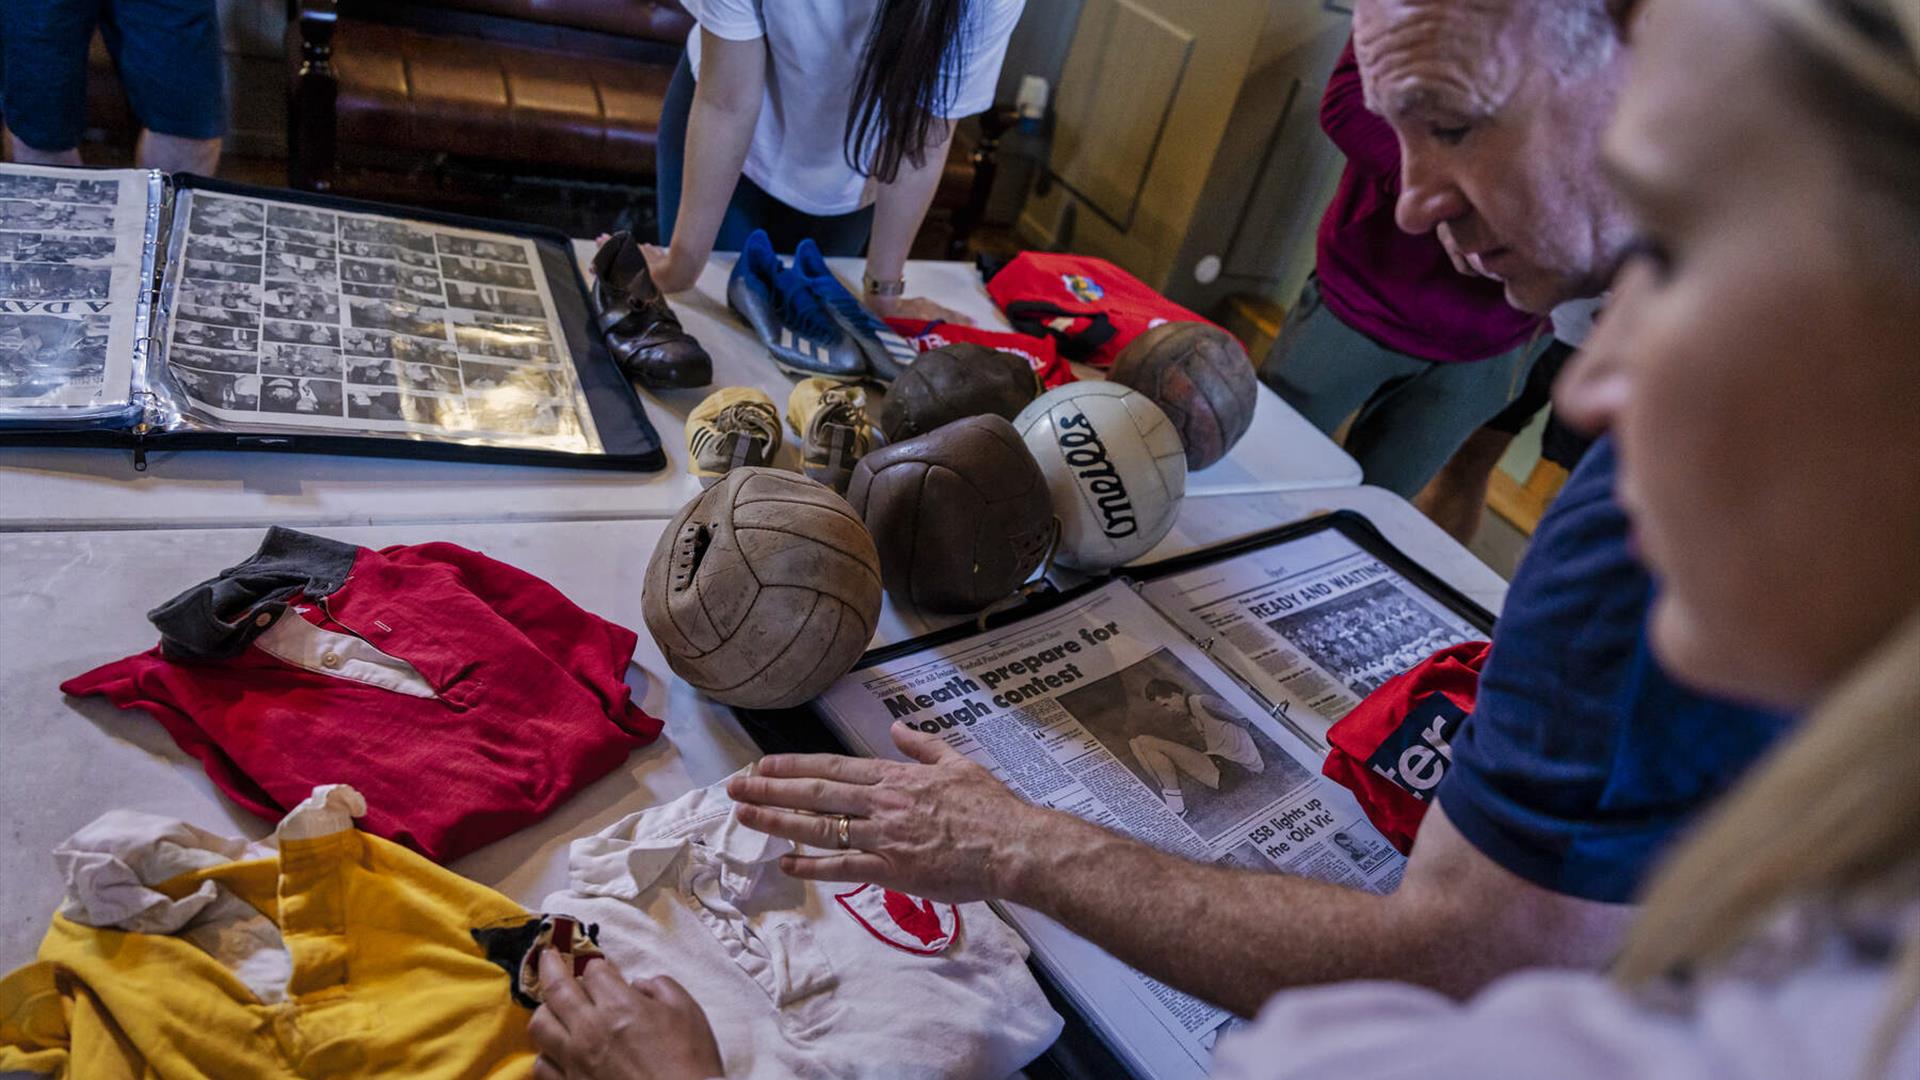 Guests examine Down GAA historical artefacts as part of the Gaelic Games and Craic experience